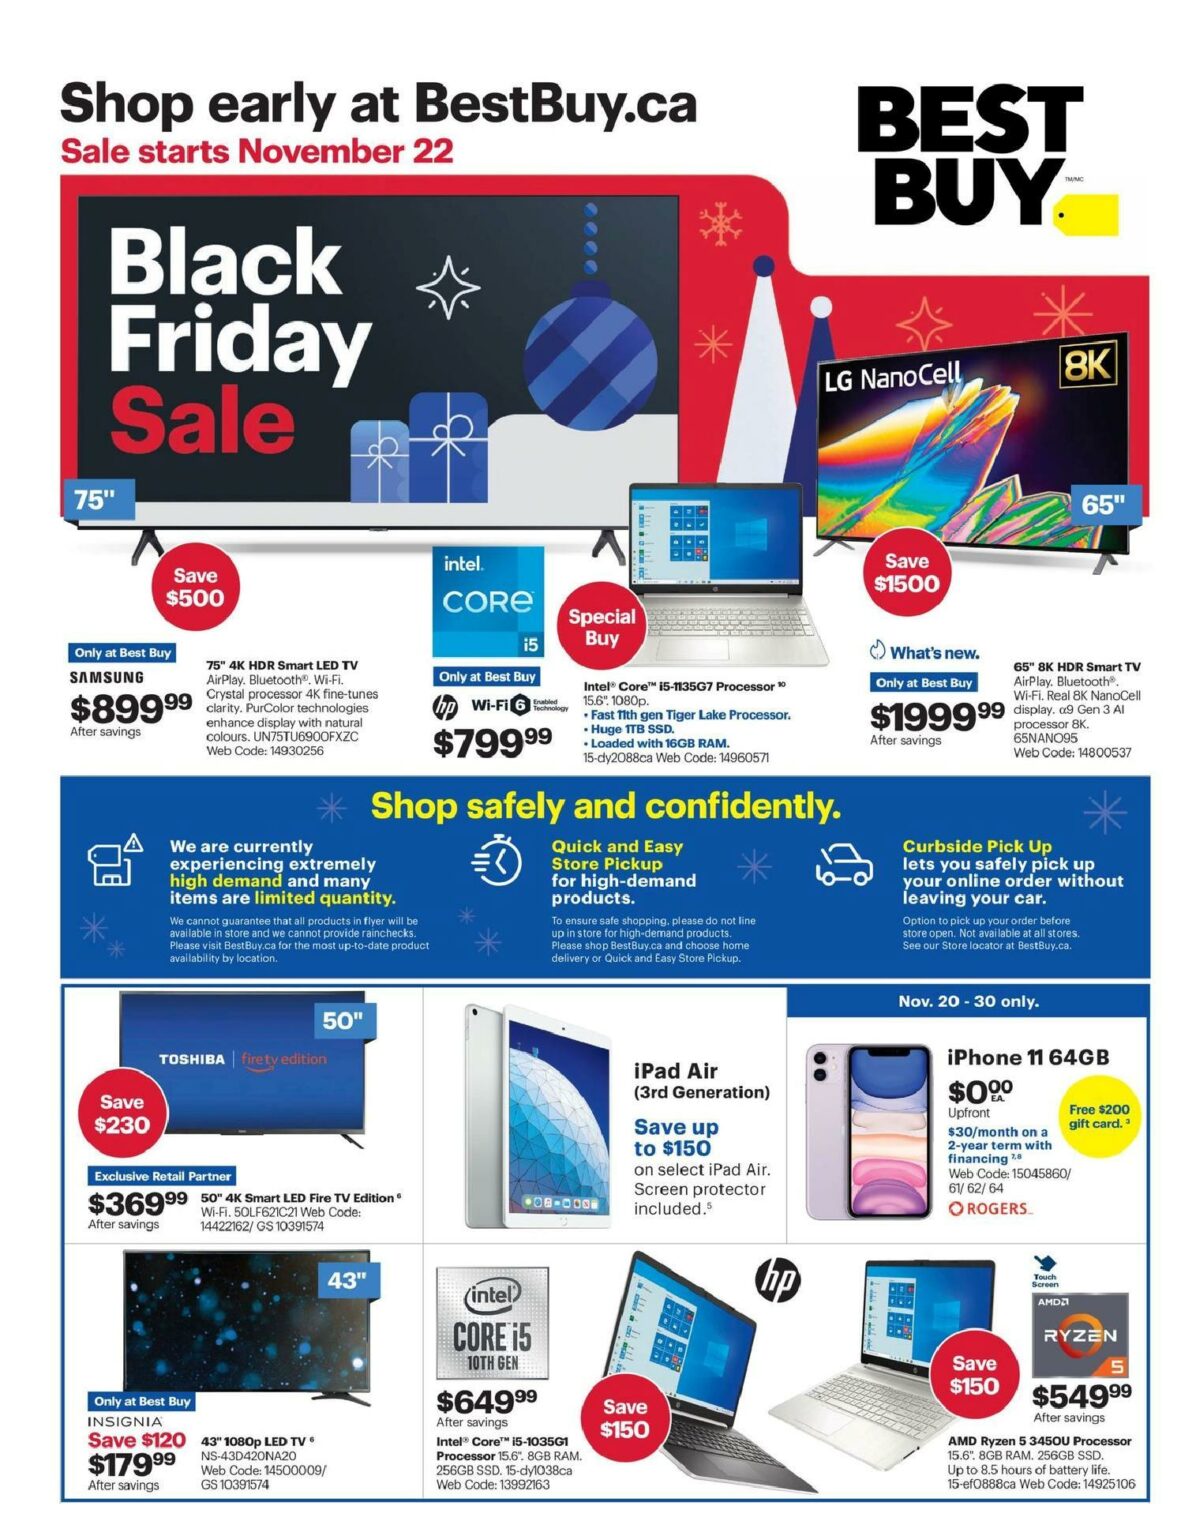 Best Buy Black Friday Flyer Deals 2020 Canada - Will Black Friday Deals Be For Universe